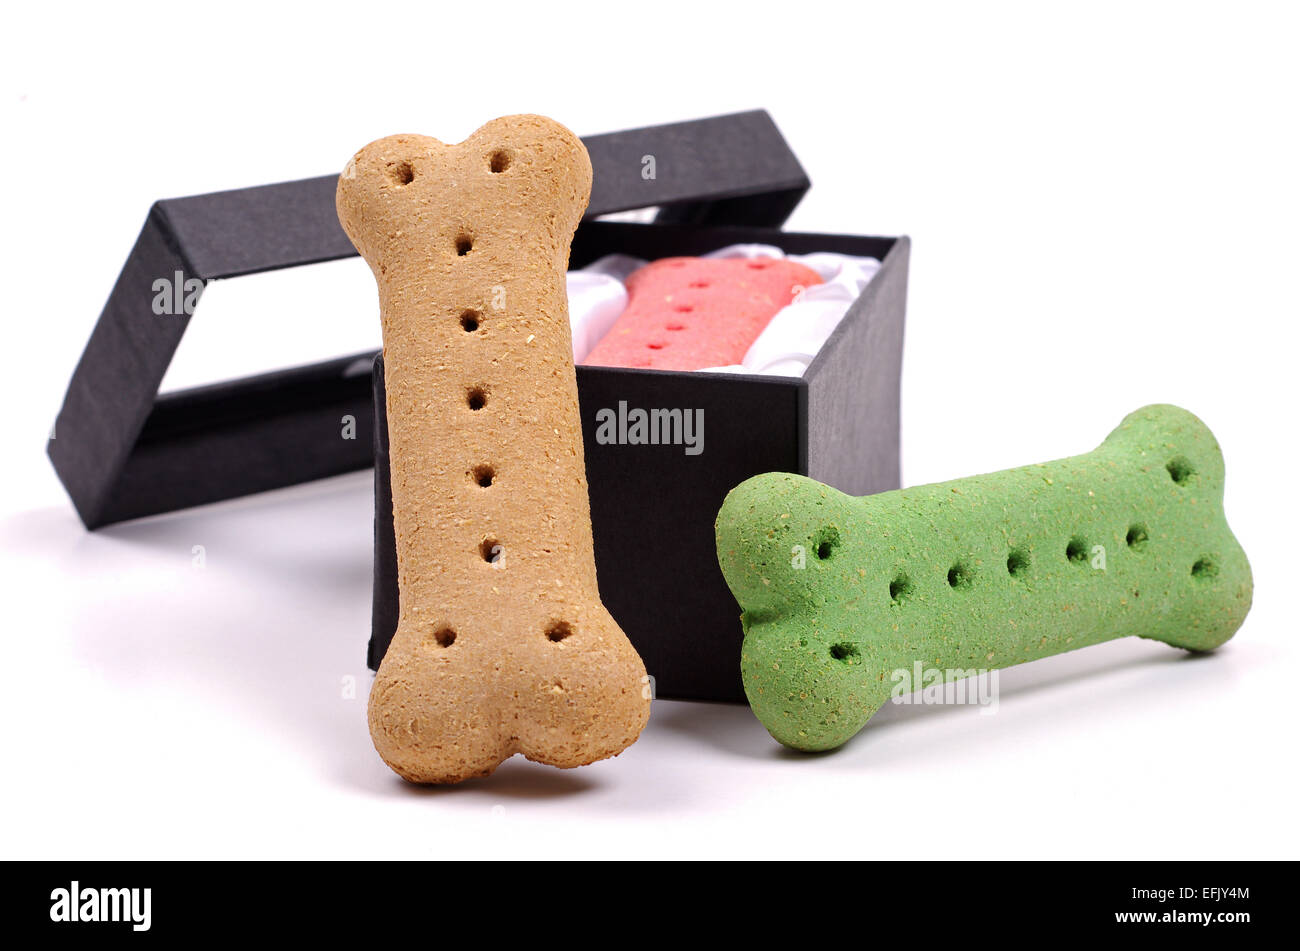 dog biscuits and a black box Stock Photo